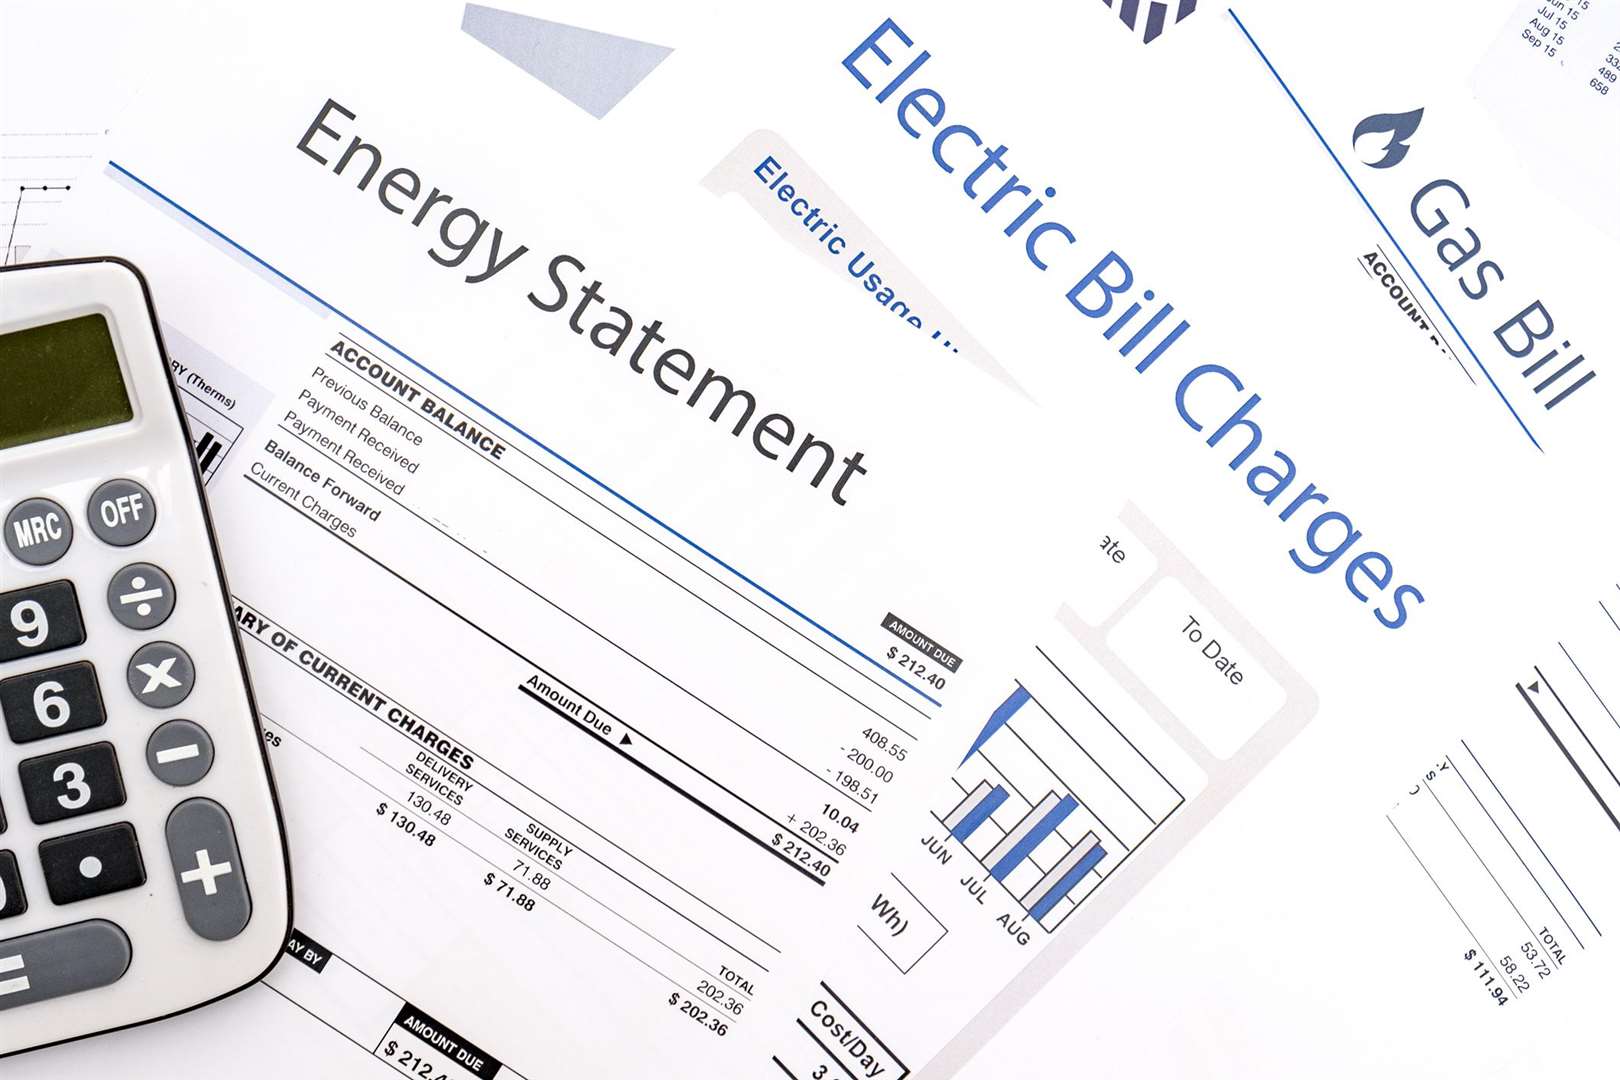 Energy experts predict as prices come down better deals may follow. Image: iStock.